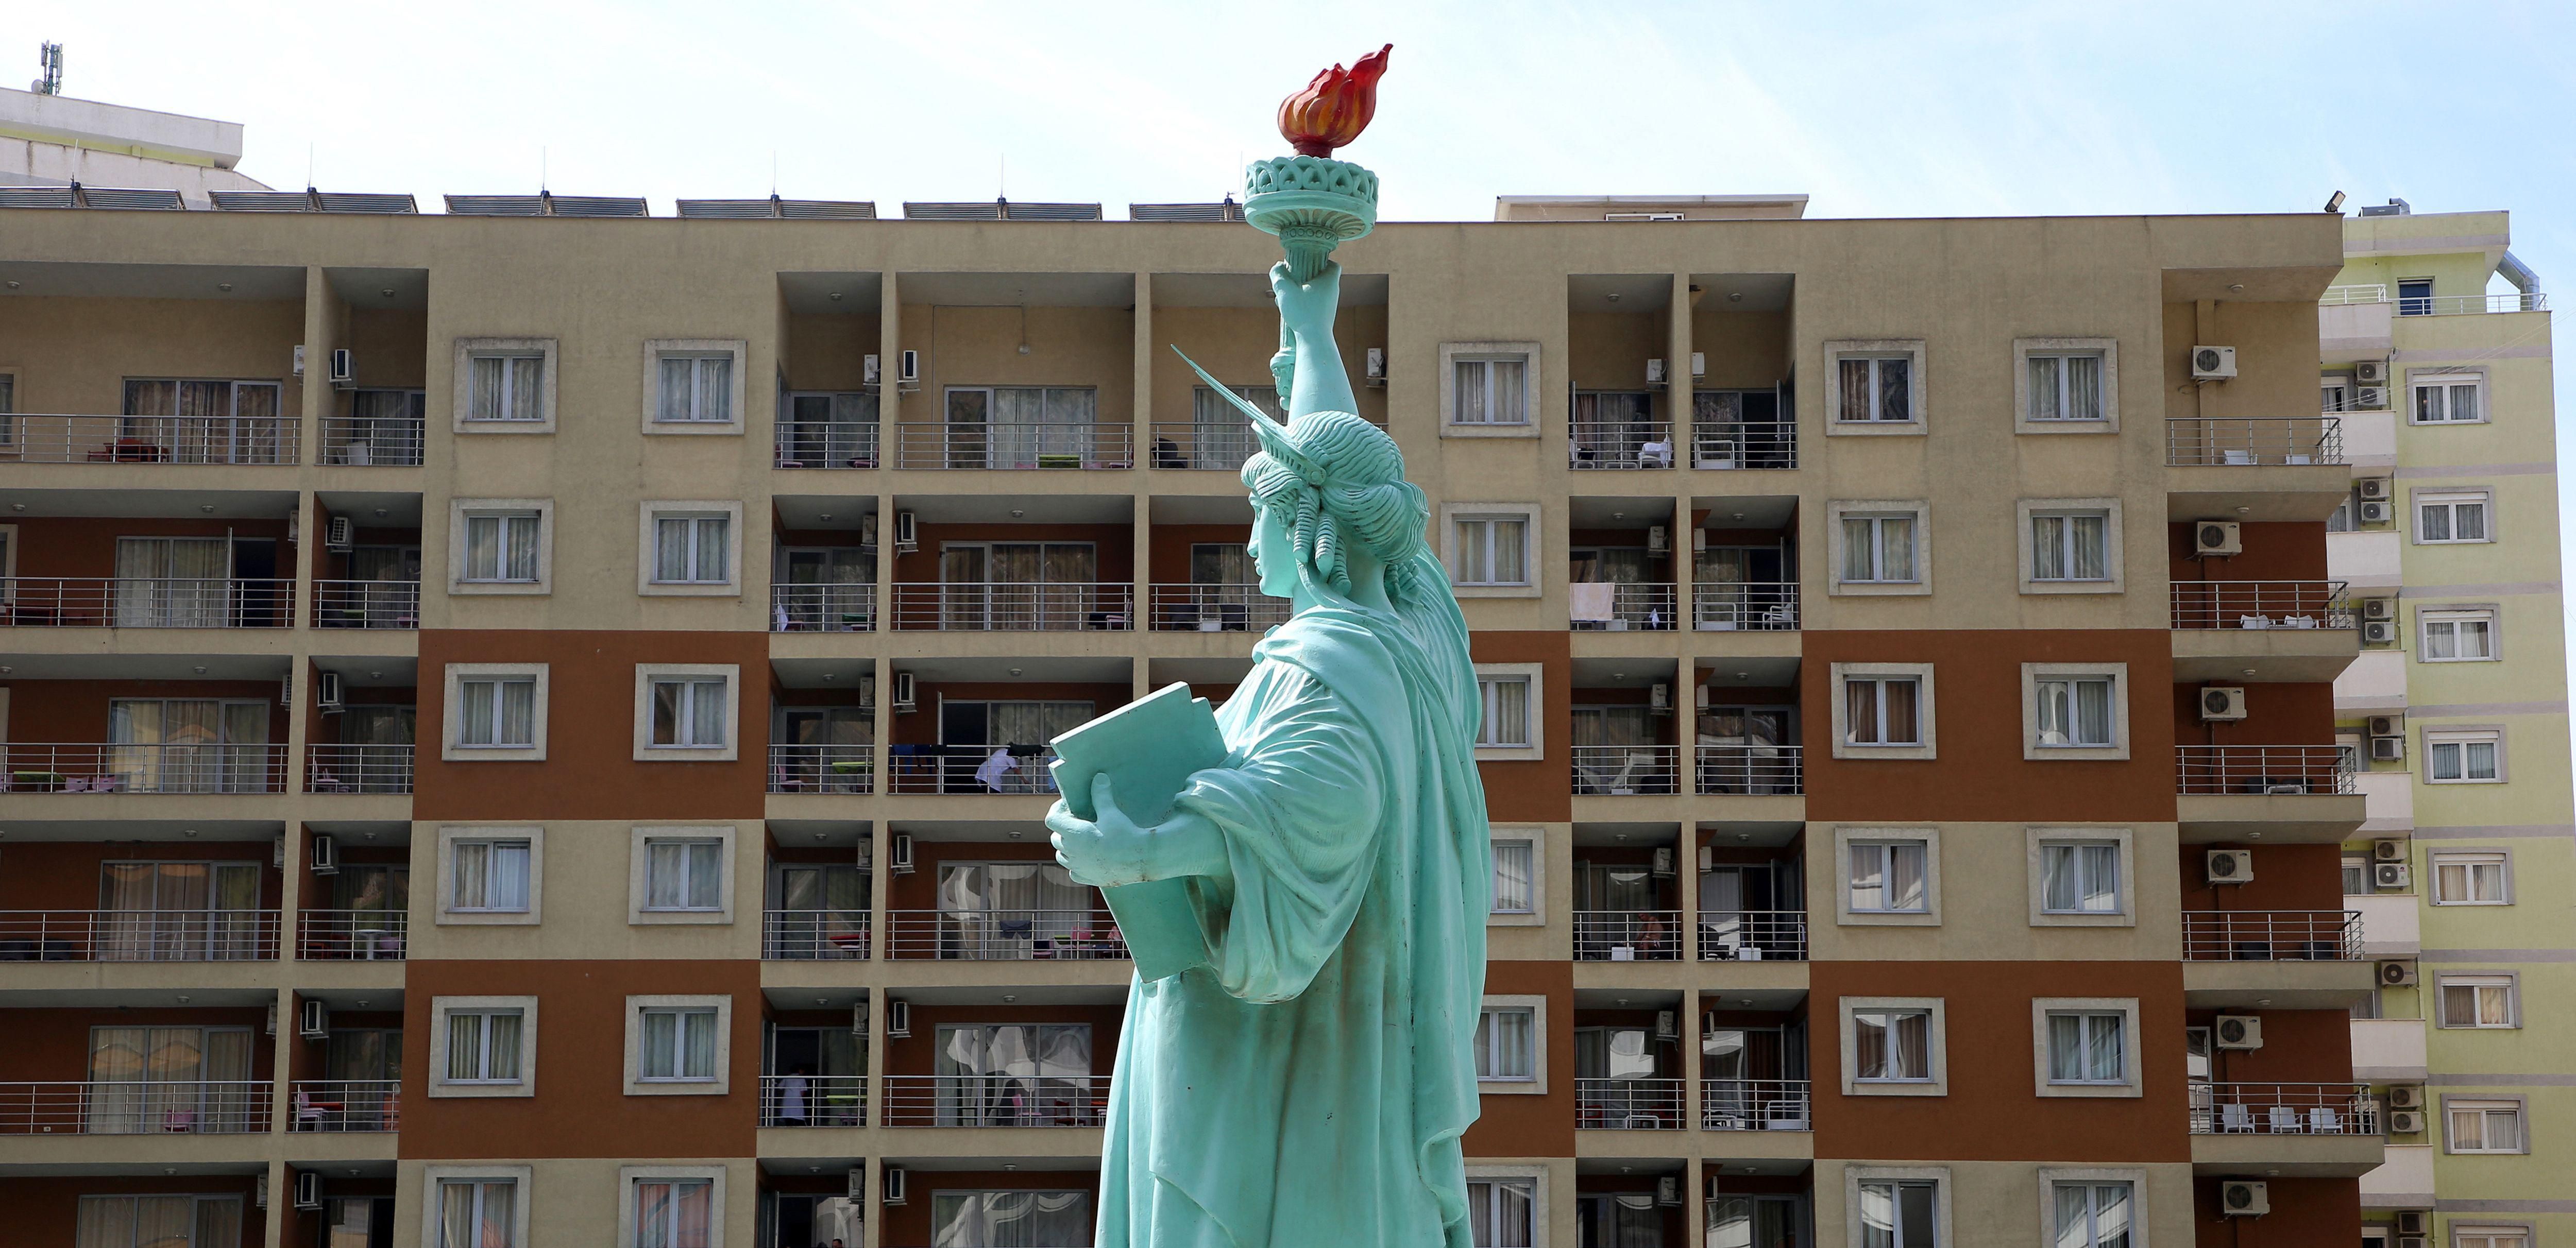 Statue of Liberty Mock-Up in China